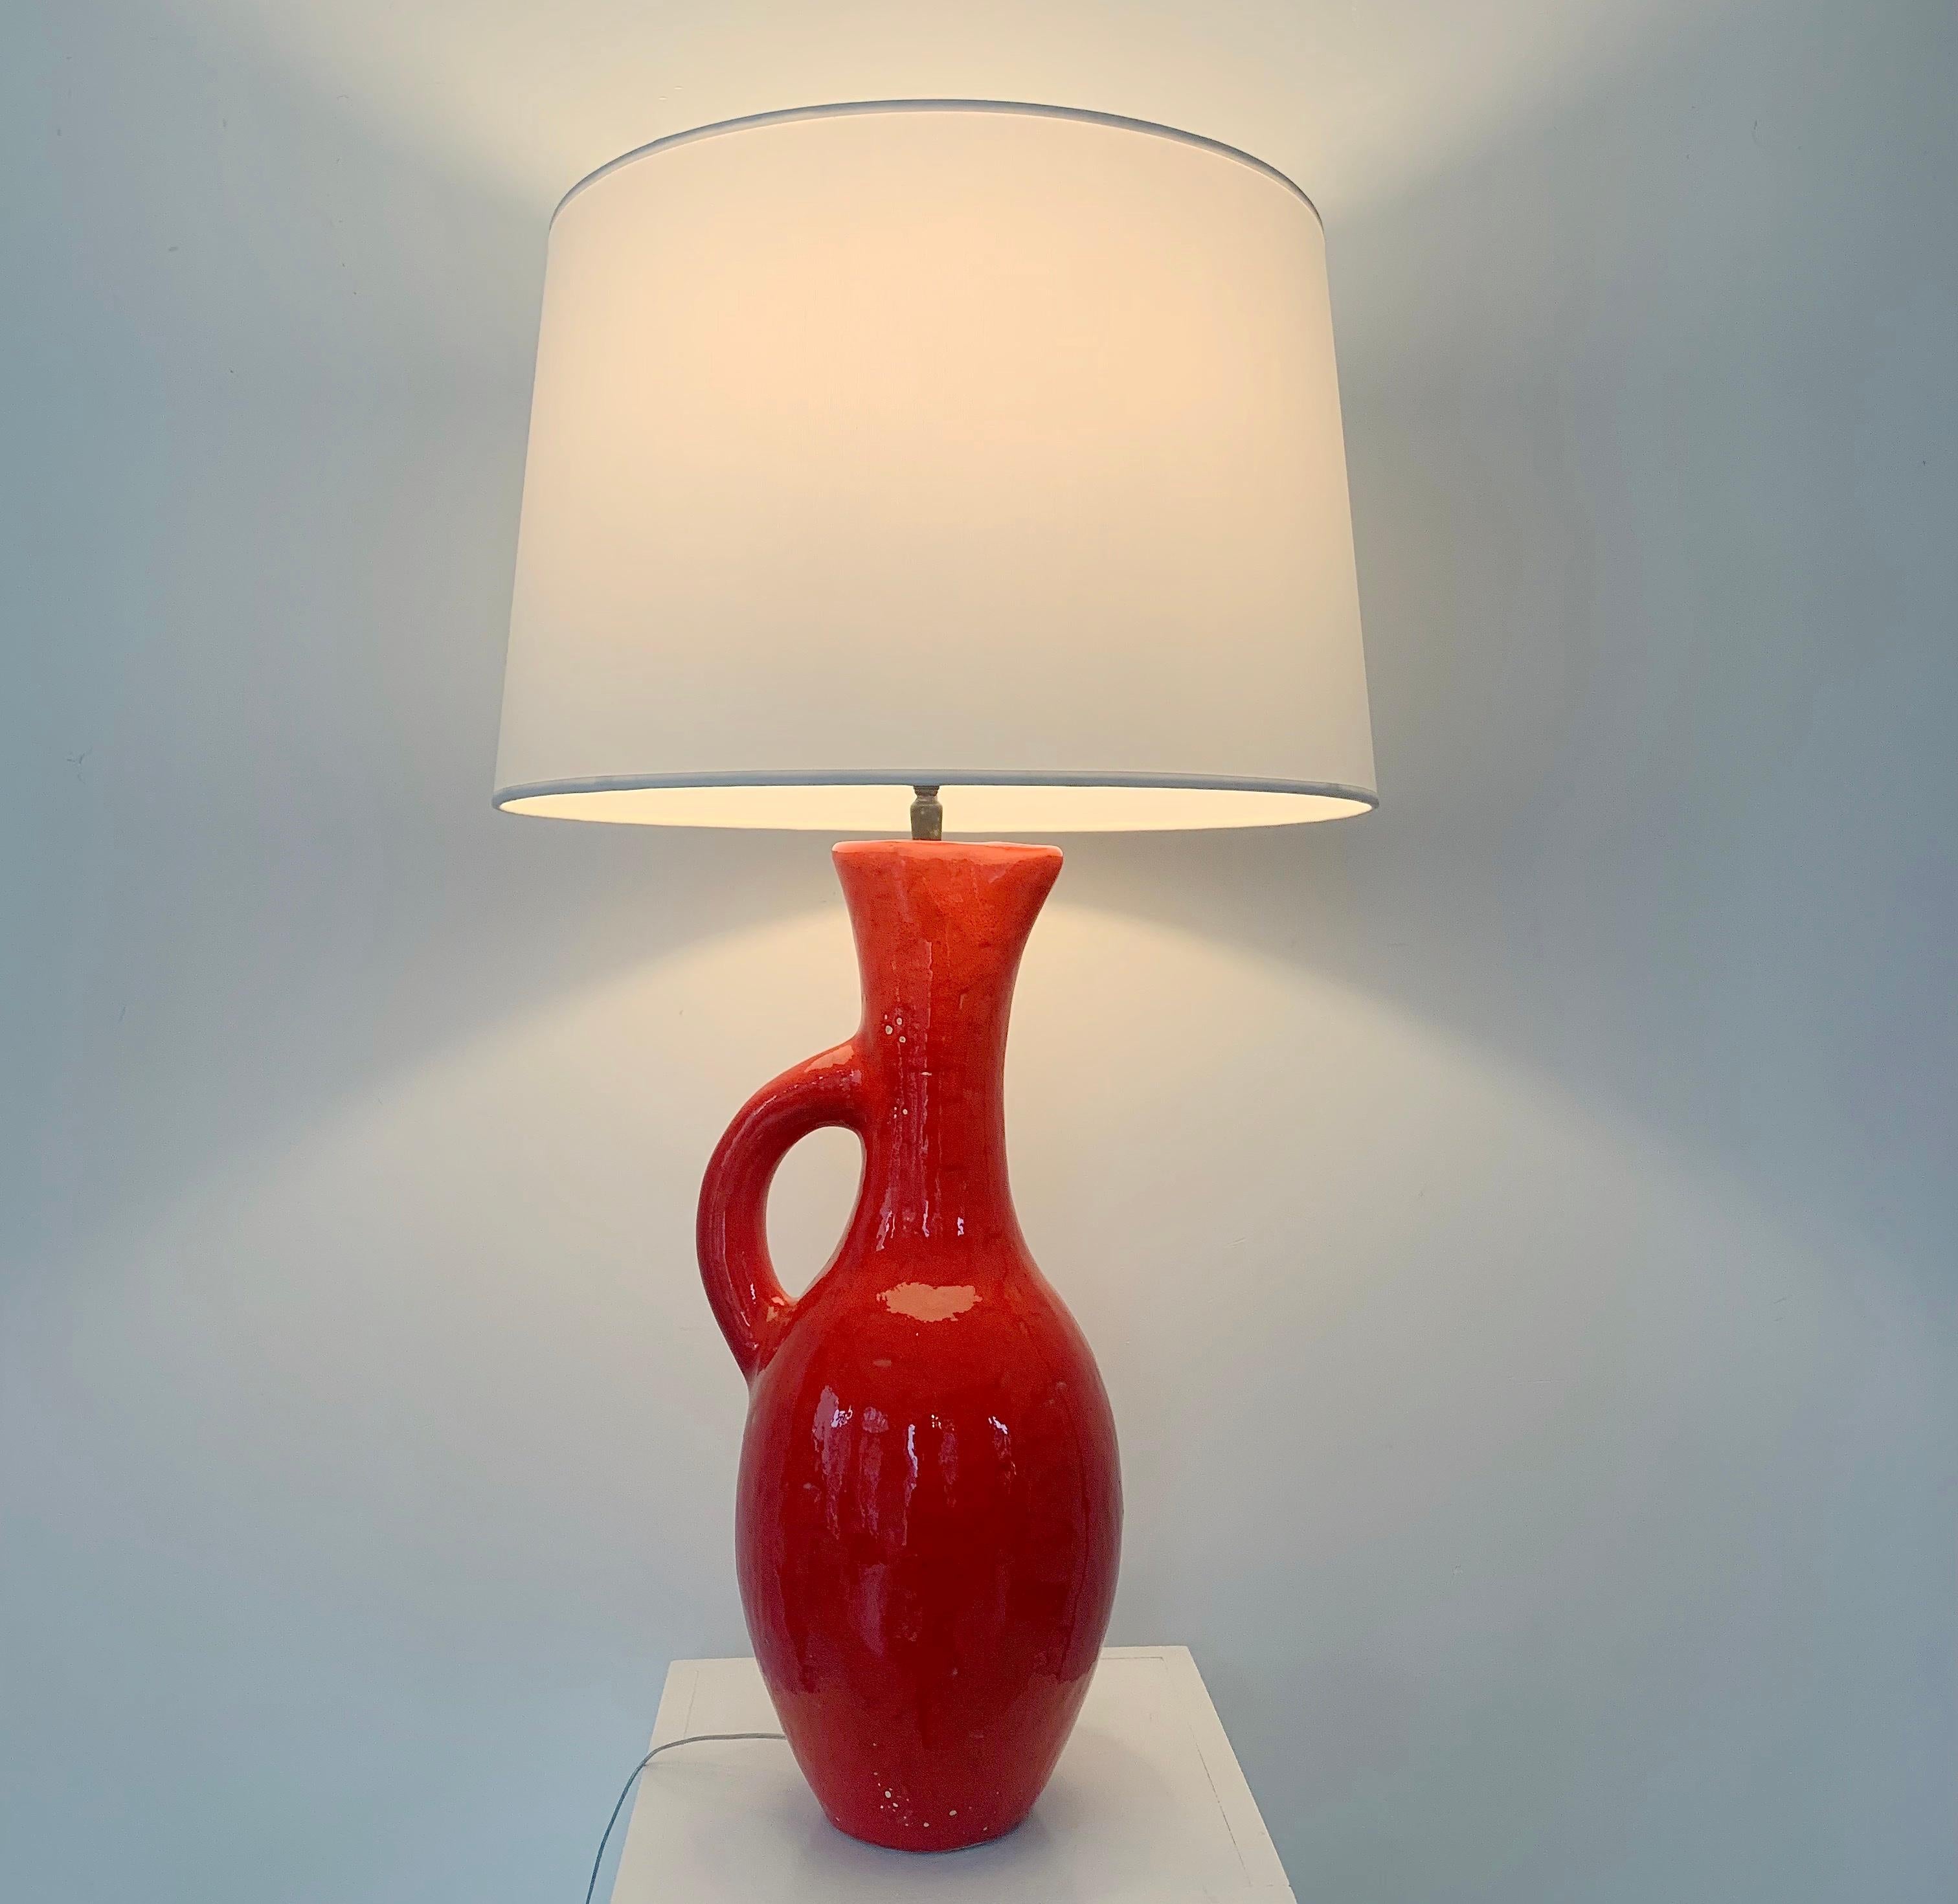 Les Archanges/Gilbert Valentin Large Signed Table Lamp, 1950s, Vallauris. 2